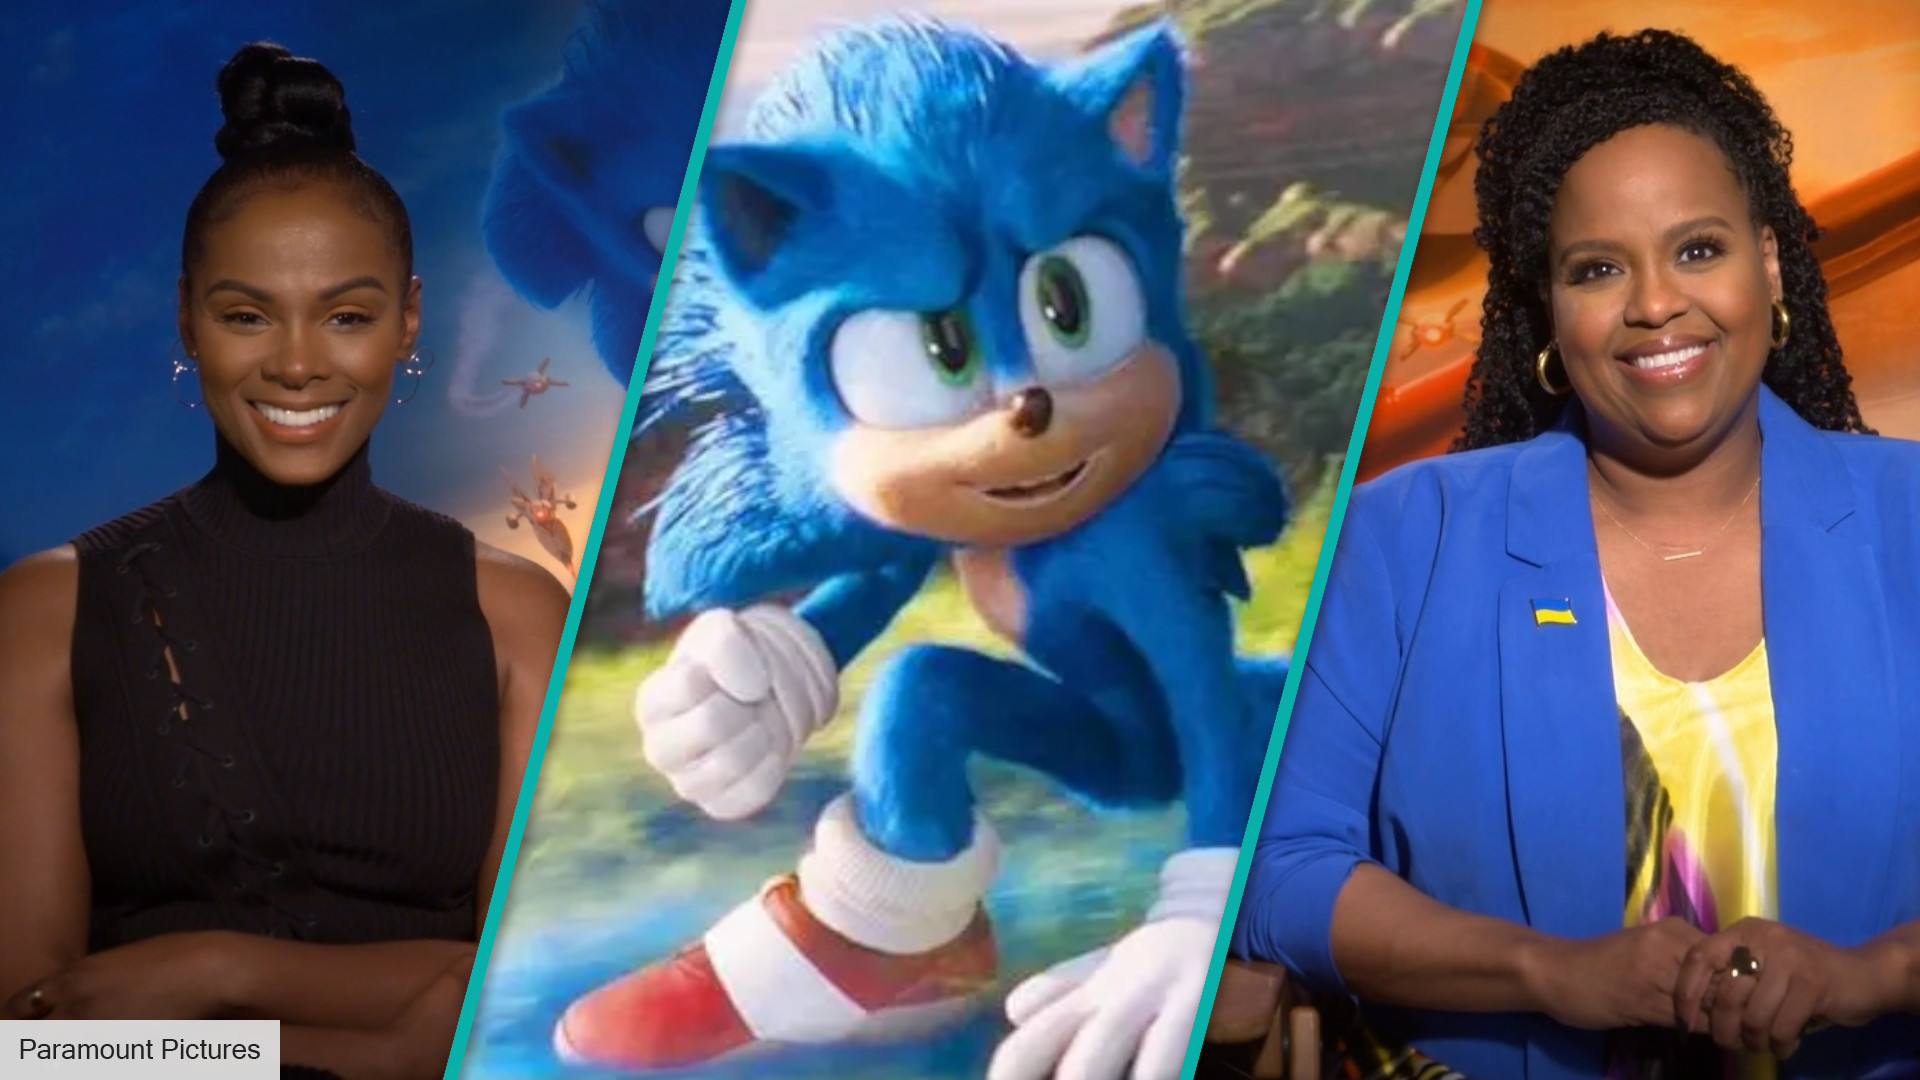 Sonic the Hedgehog' Movie Finds Female Lead in Tika Sumpter